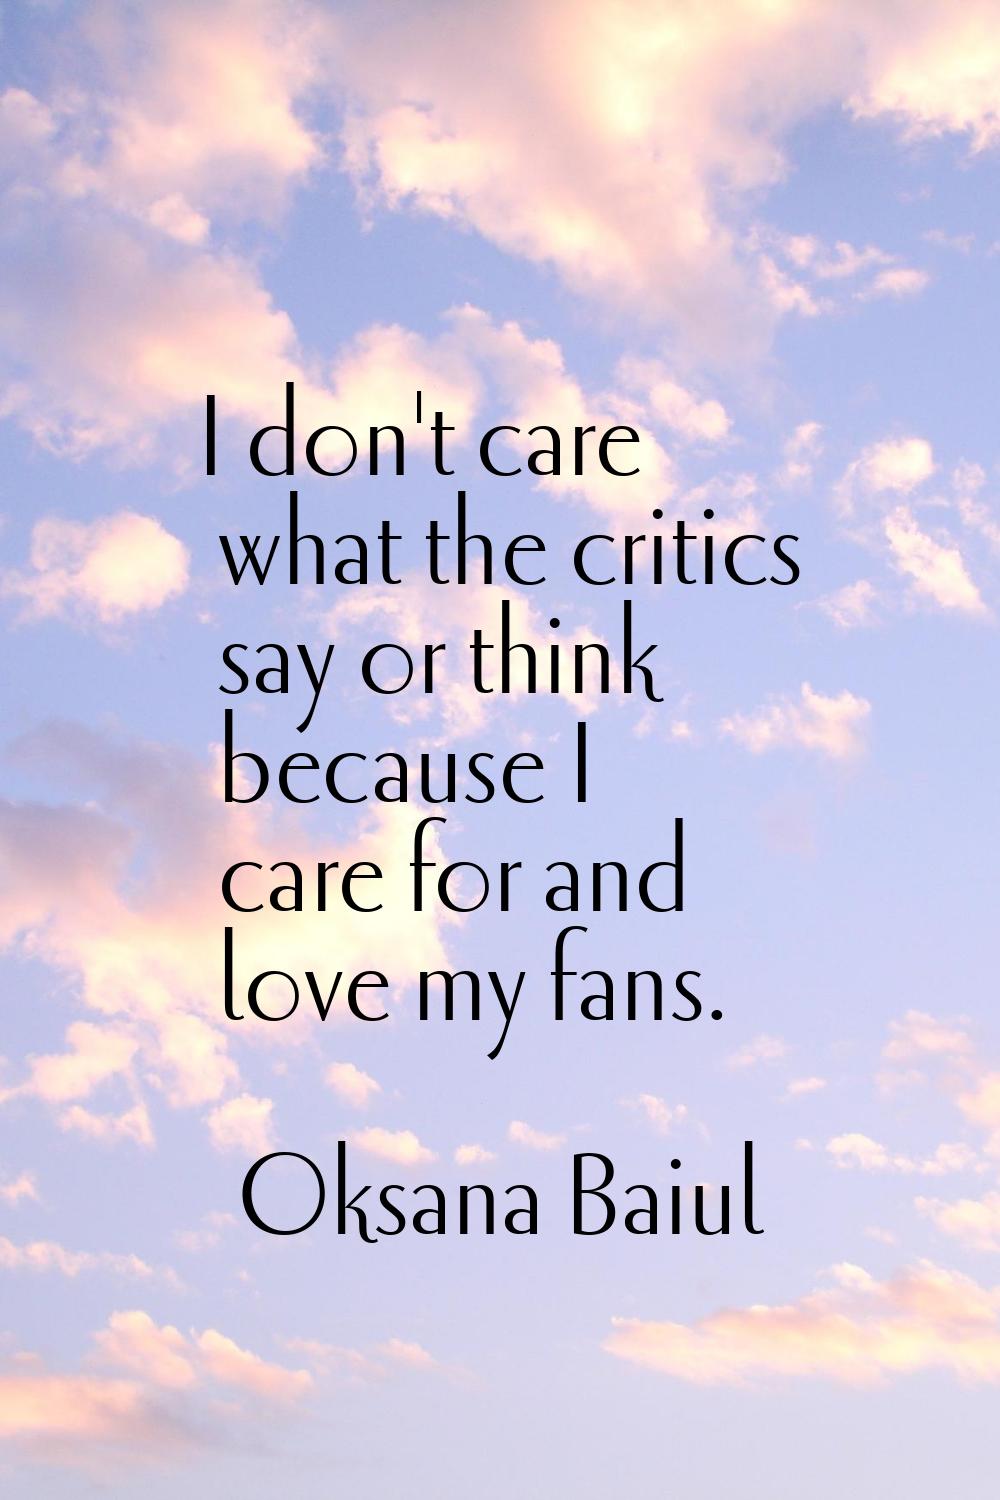 I don't care what the critics say or think because I care for and love my fans.